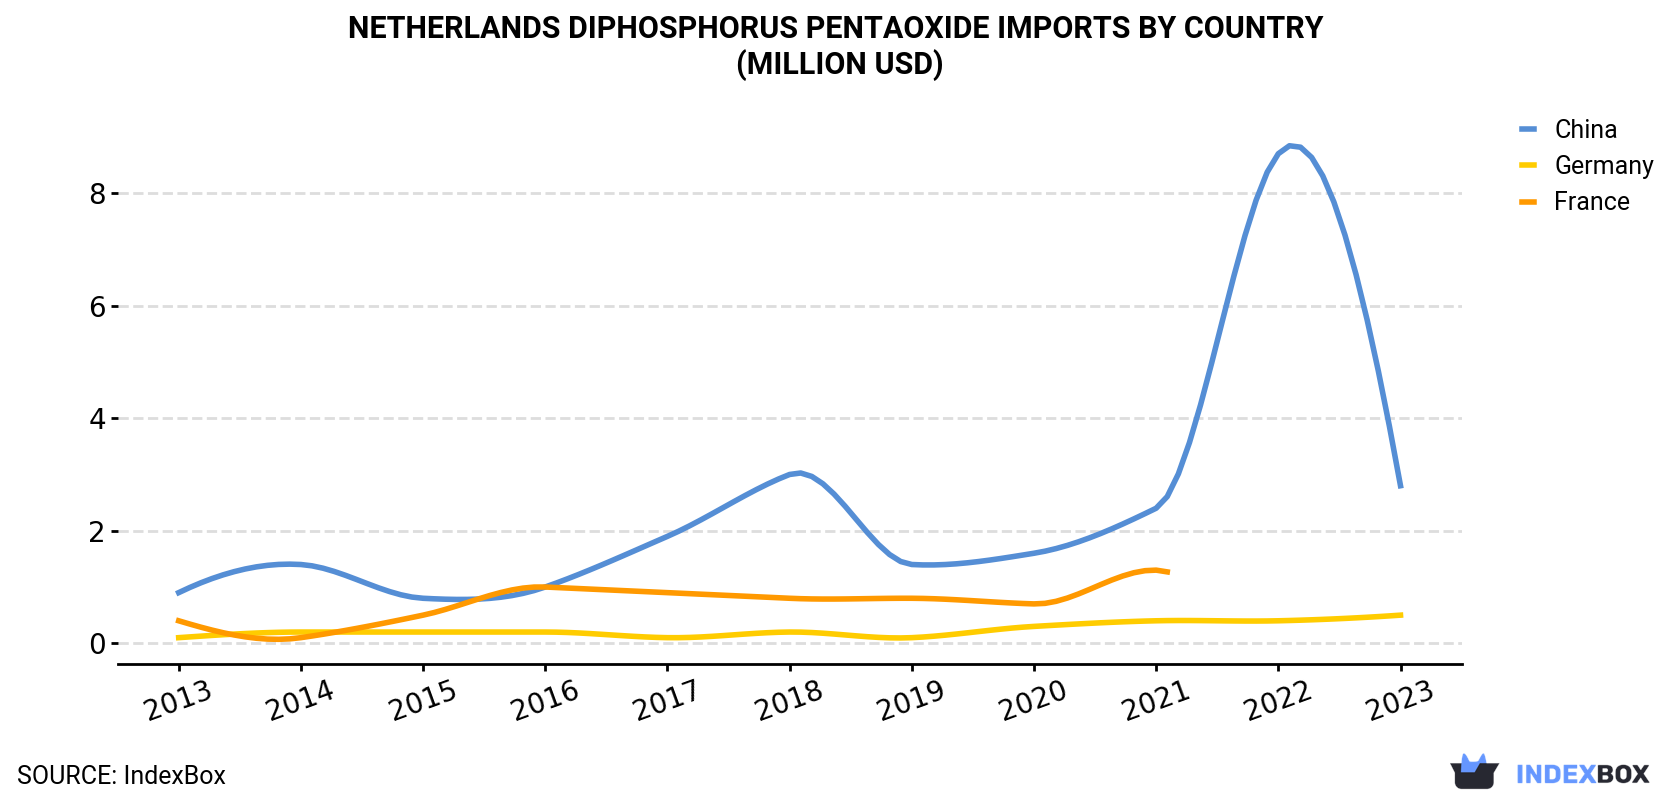 Netherlands Diphosphorus Pentaoxide Imports By Country (Million USD)